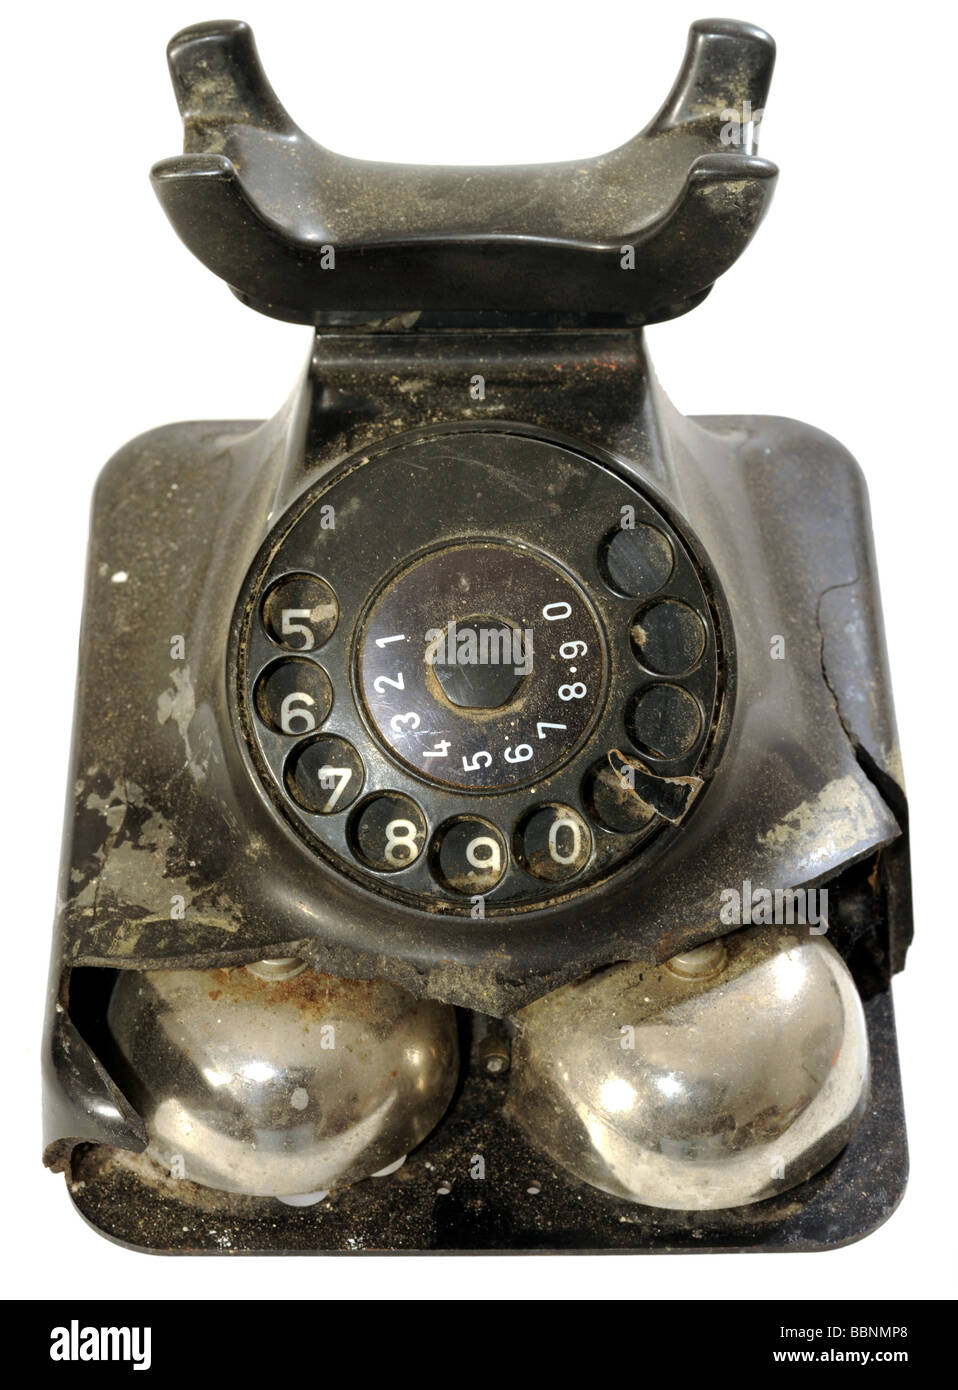 technics, telephone, typ W 48, damaged, Germany, 1961, faulty, damage, case, dial, dirt, dirty, apparature, phone, 1960s, 60s, historic, historical, 20th century, clipping, cut out, cut-out, cut-outs, Stock Photo